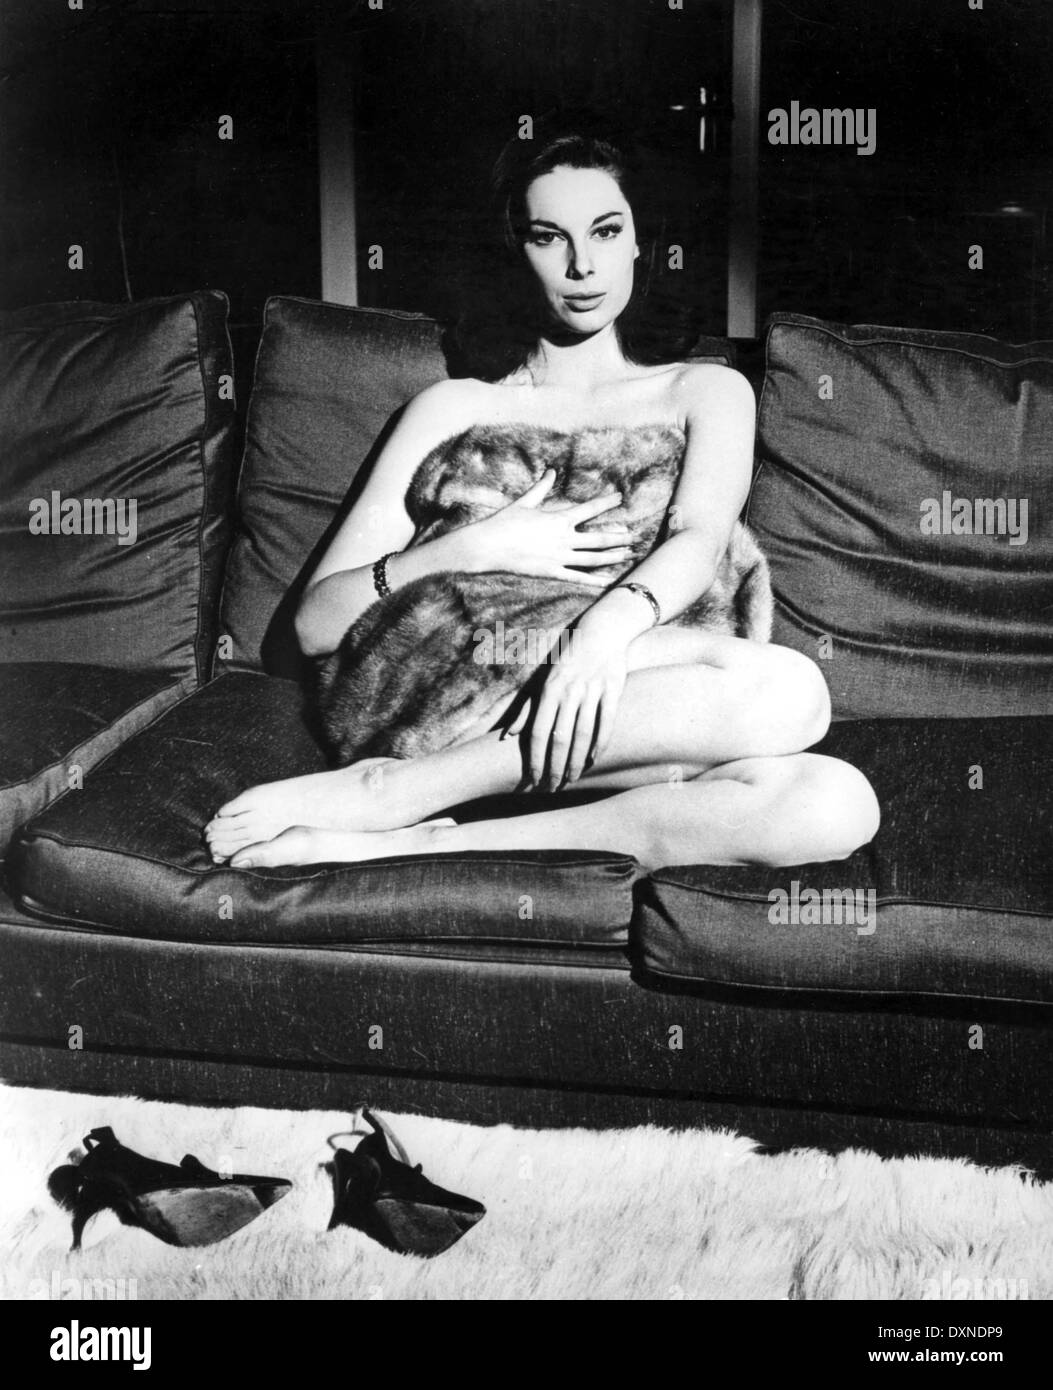 Tracy reed black actress